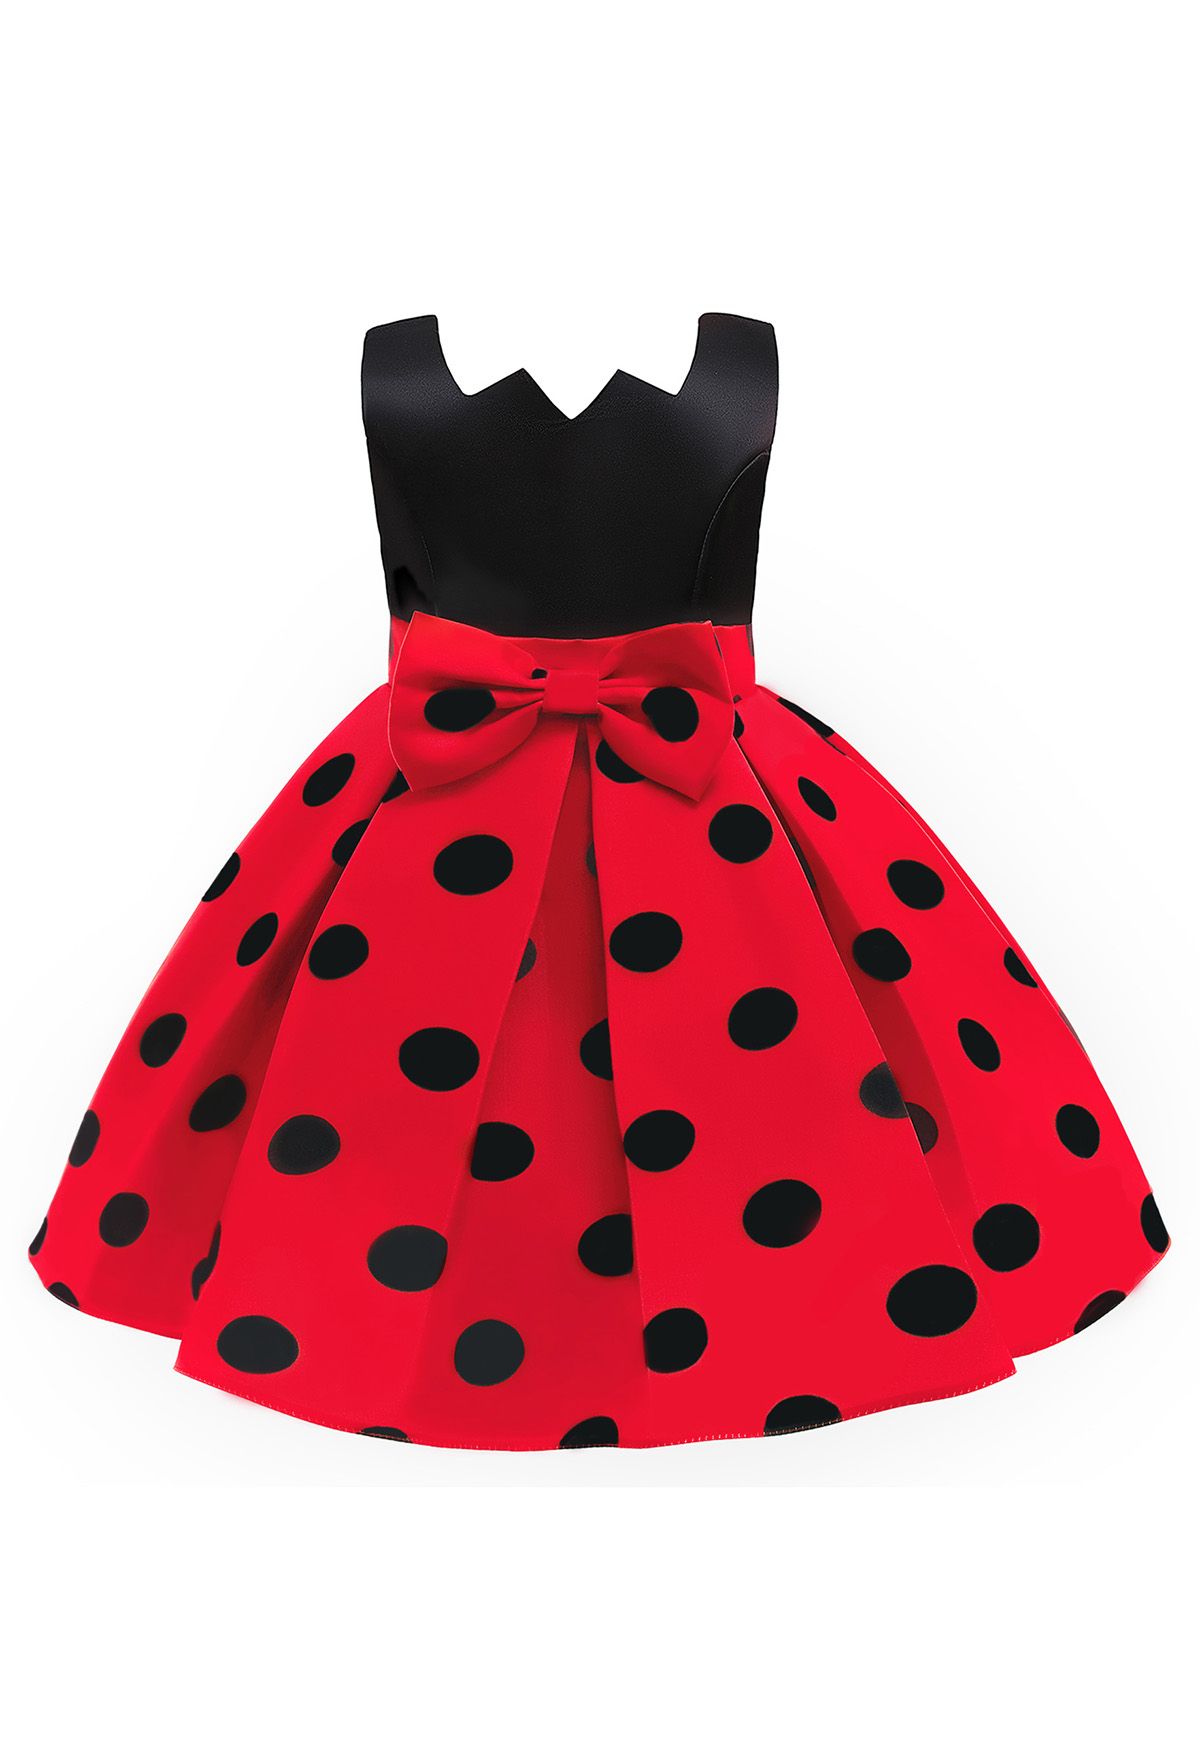 Polka Dot Bowknot Pleated Princess Dress in Red   Retro, Indie and